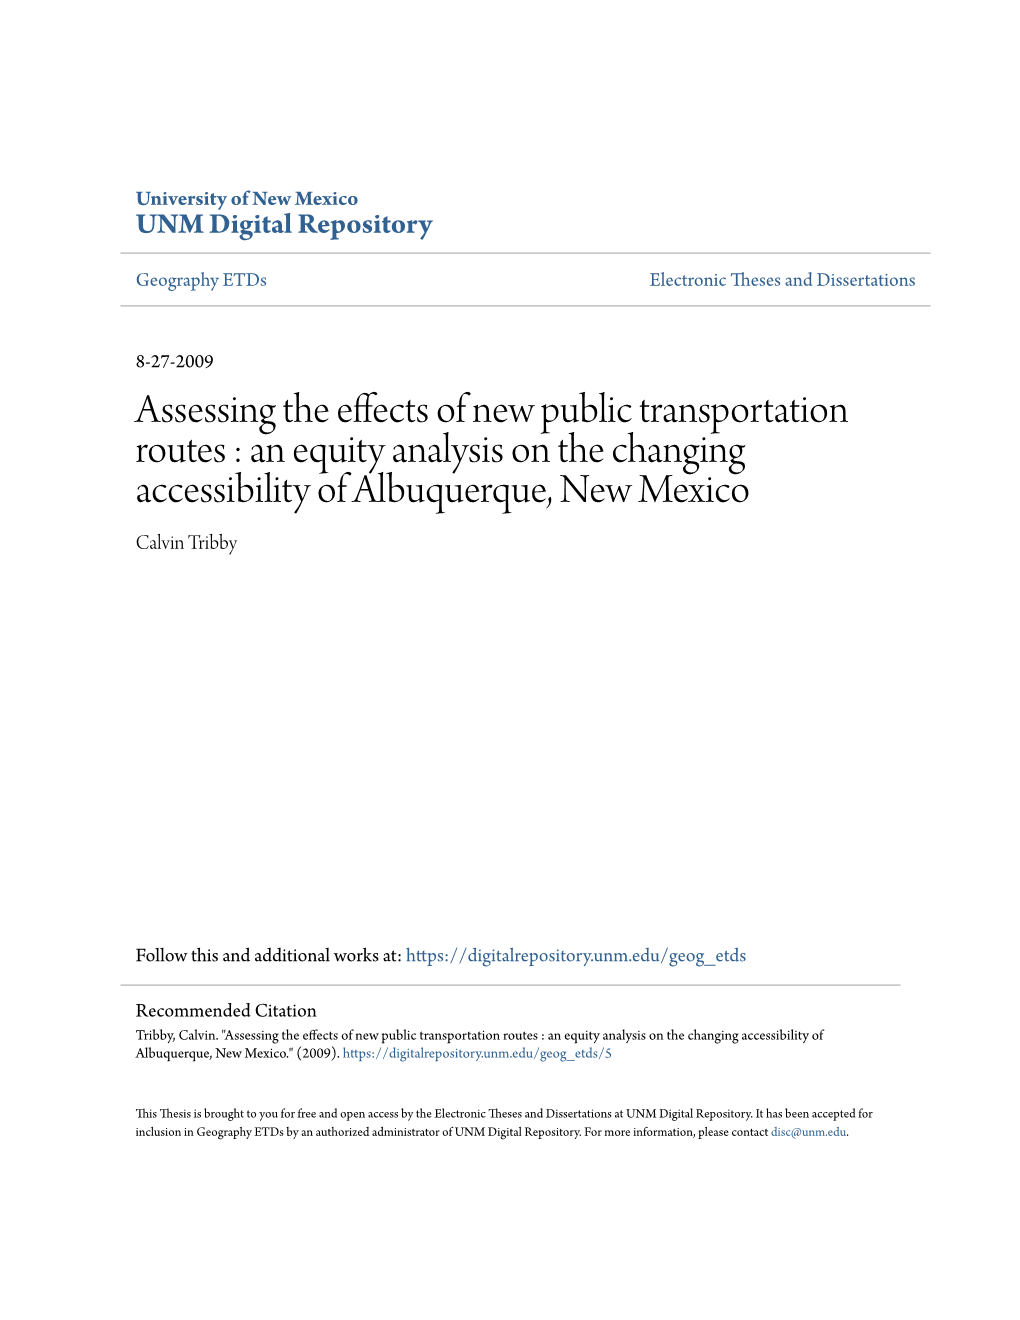 Assessing the Effects of New Public Transportation Routes : an Equity Analysis on the Changing Accessibility of Albuquerque, New Mexico Calvin Tribby